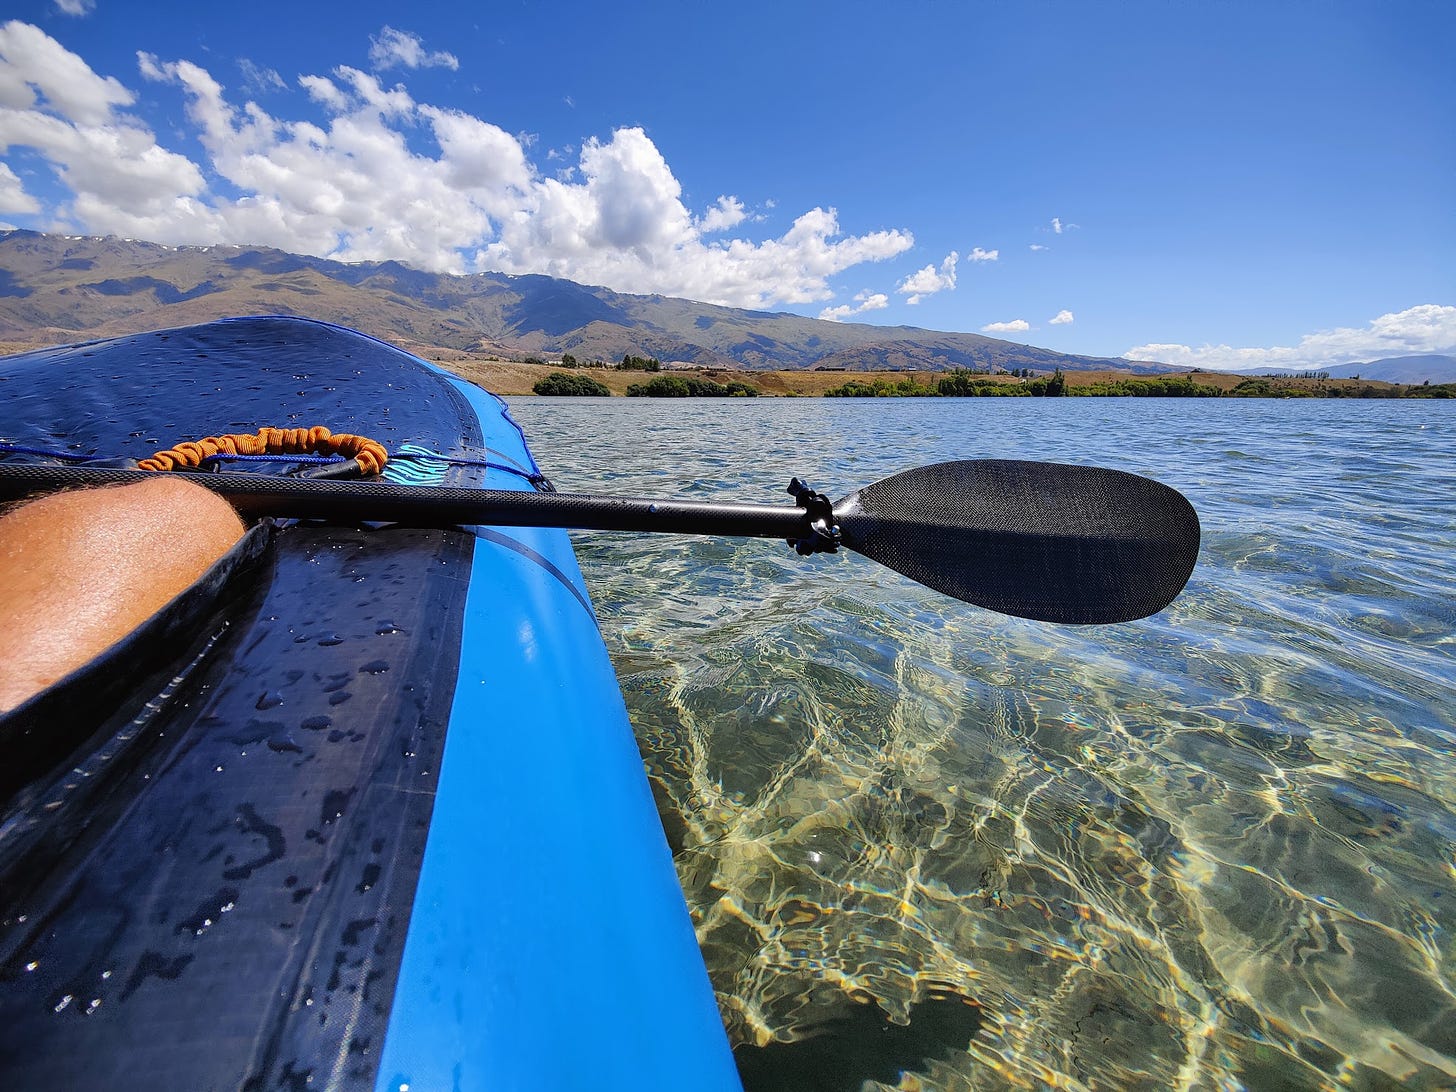 Taking the packraft for a spin on Lake Dunstan